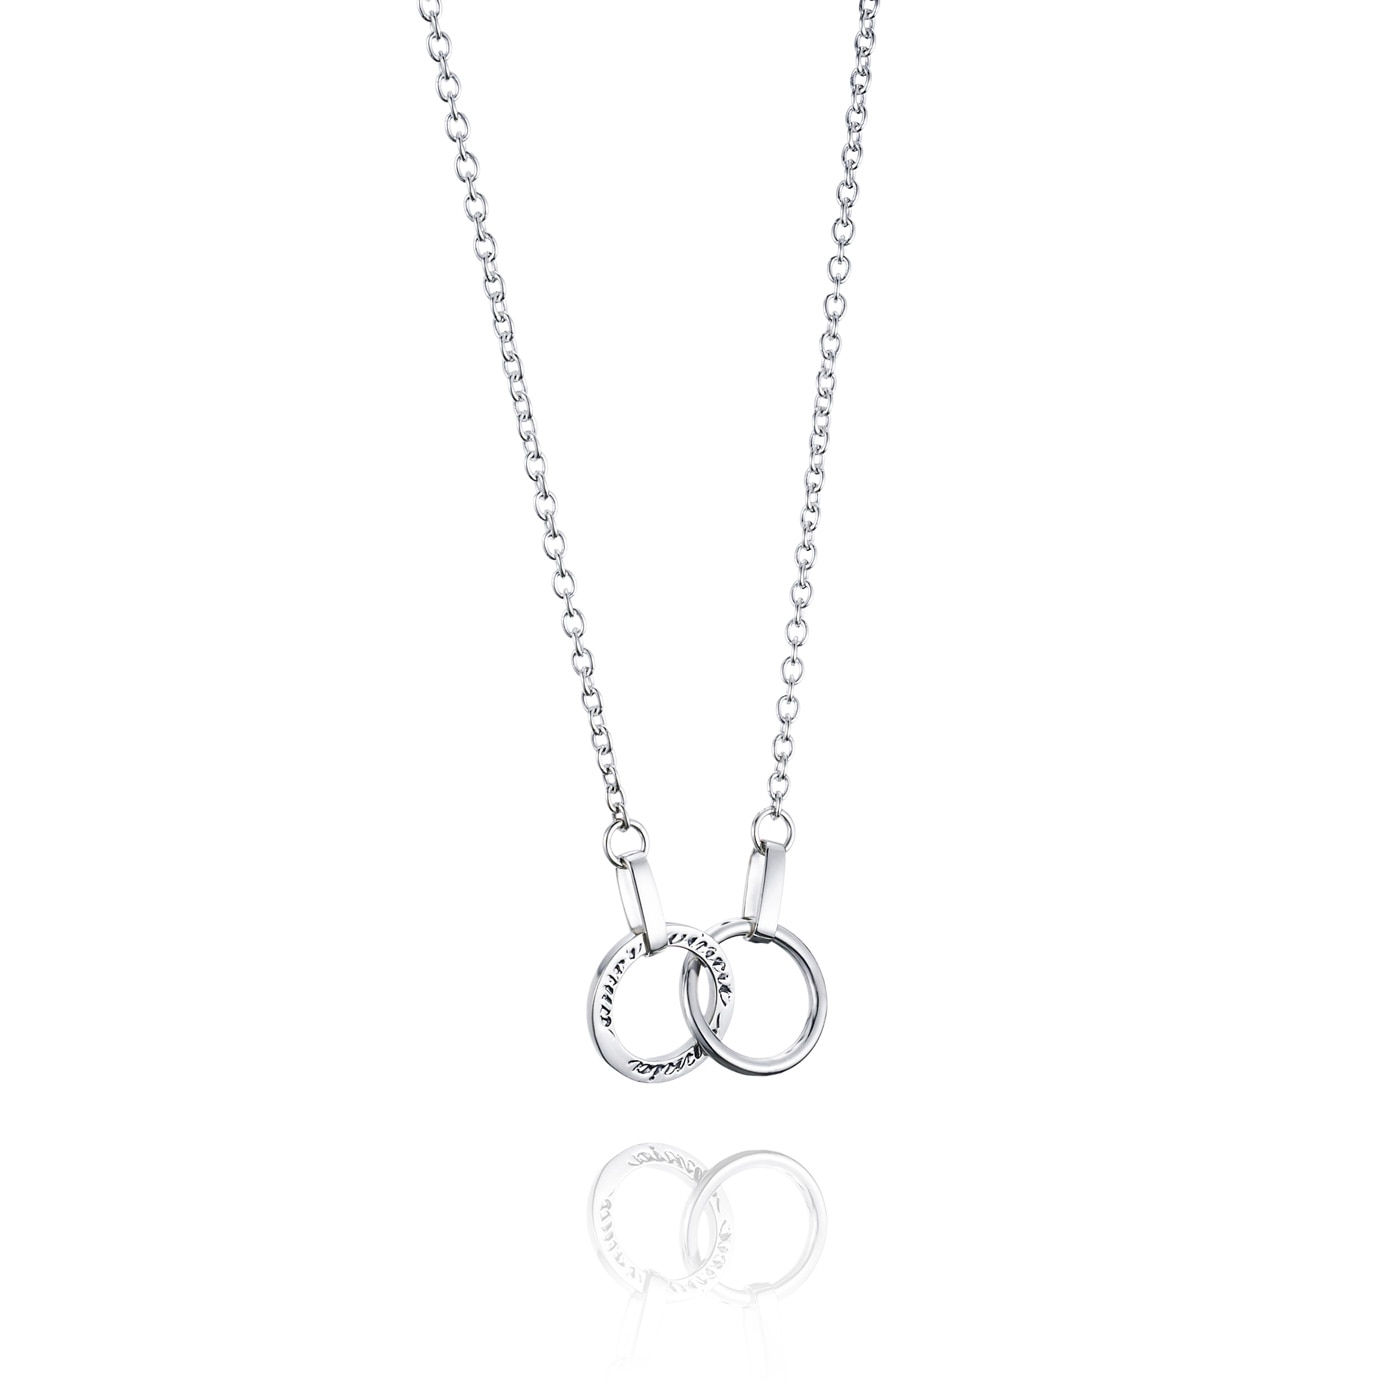 Twosome-Necklace-10-100-00524(2)